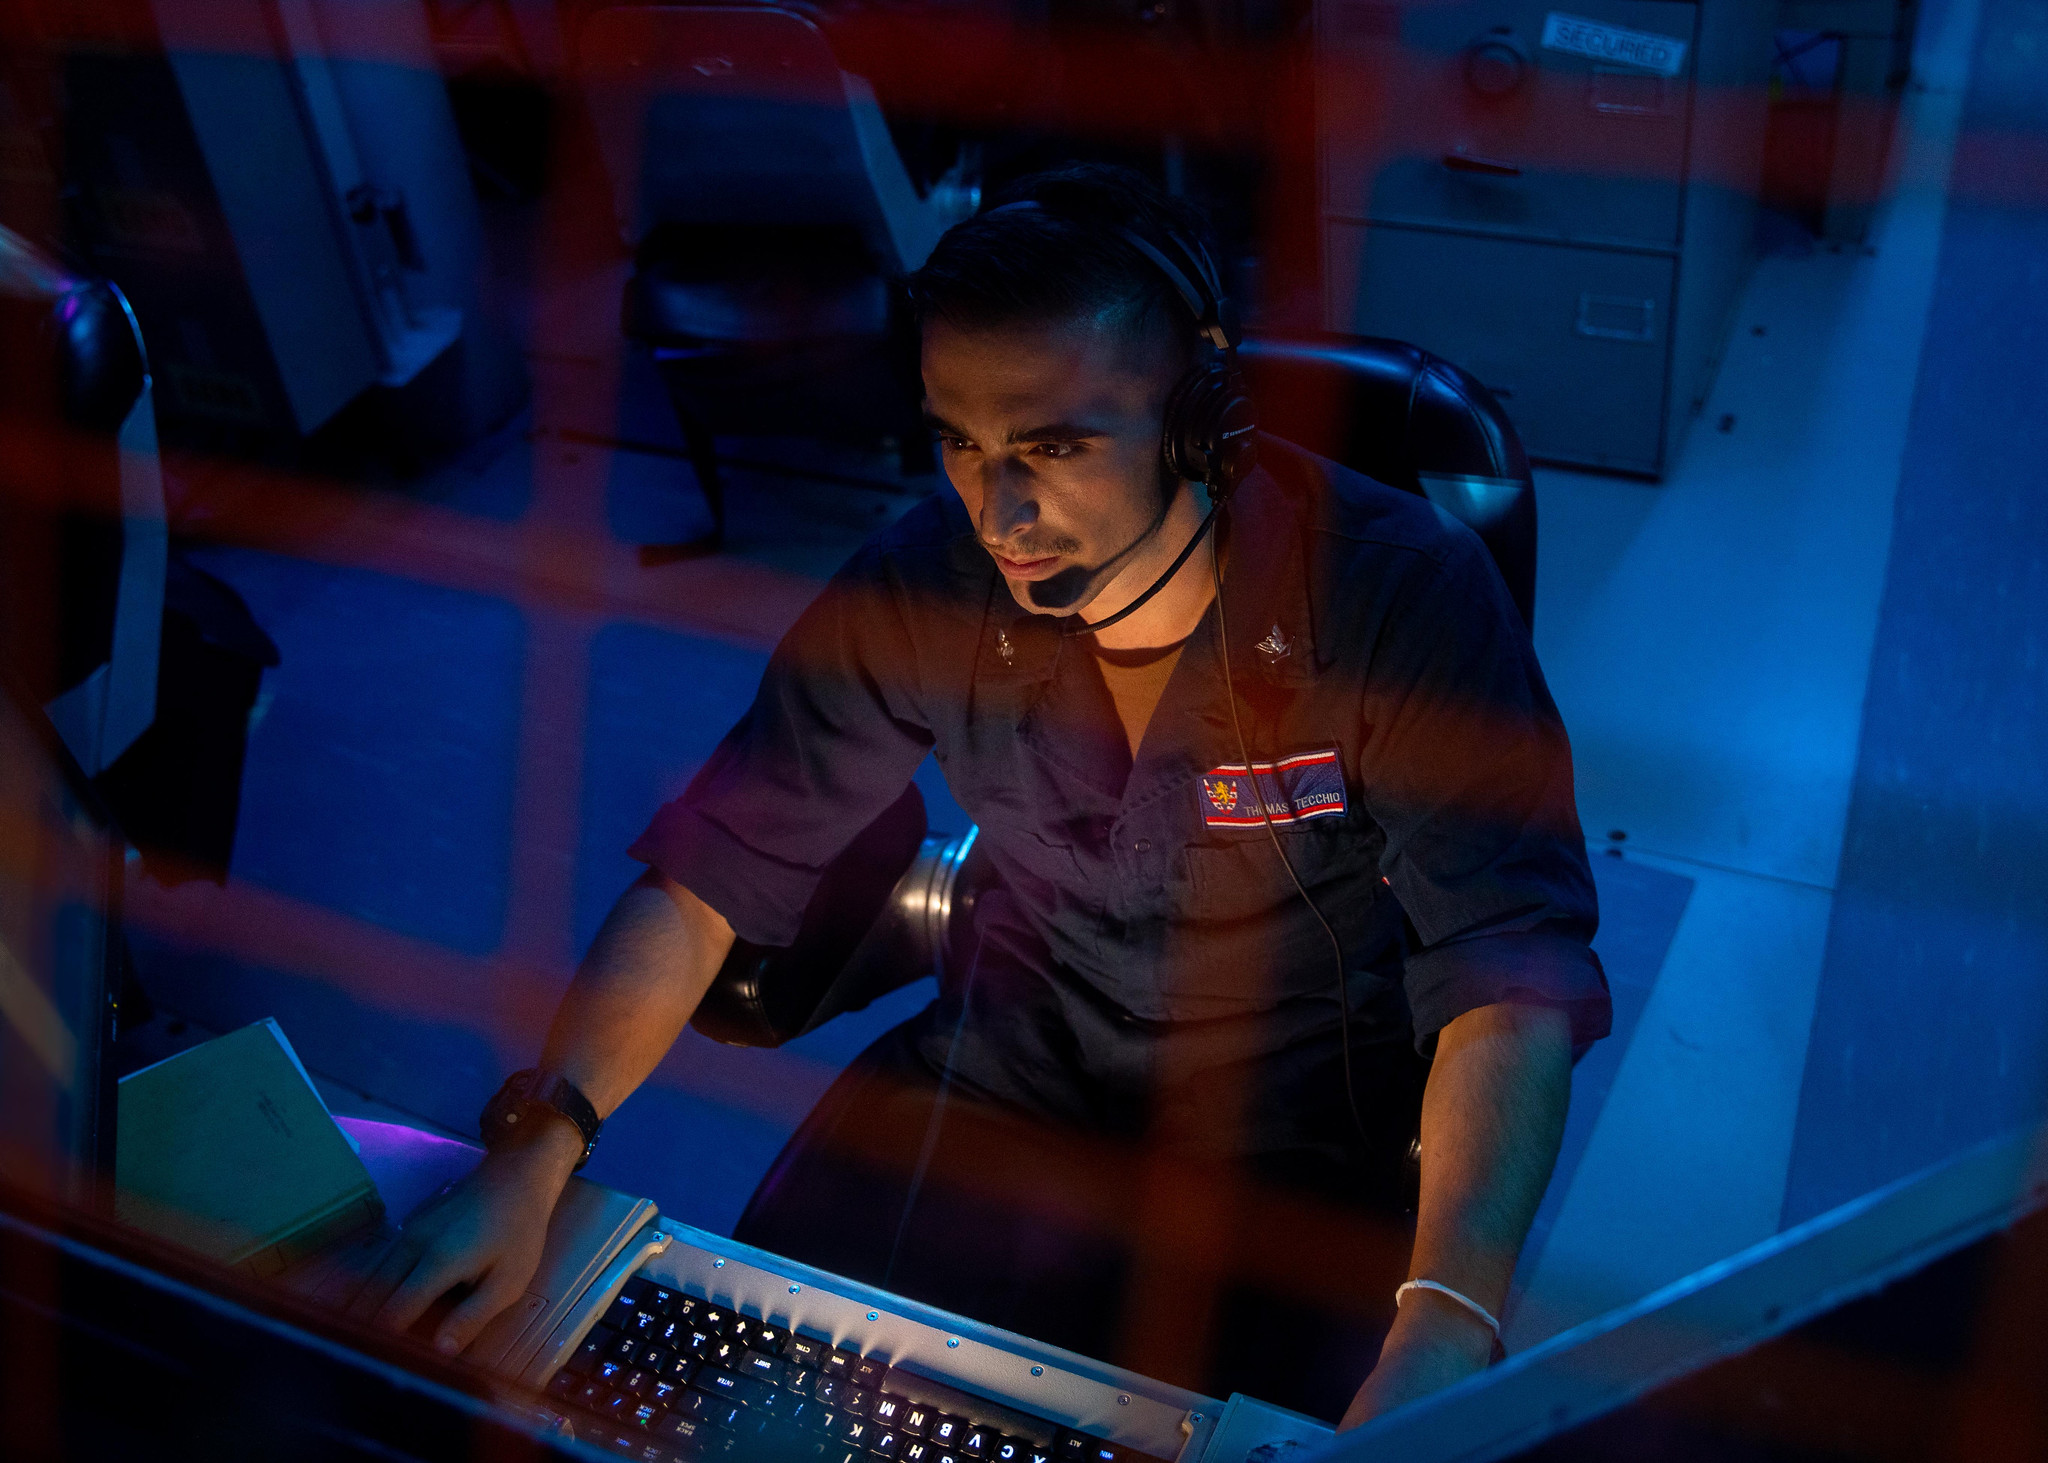 A Fire Controlman stands the spy radar system control watch aboard Arleigh Burke-class guided missile-destroyer USS Barry (DDG 52) during a routine transit of the Taiwan Strait in 2021. © U.S. Pacific Fleet.